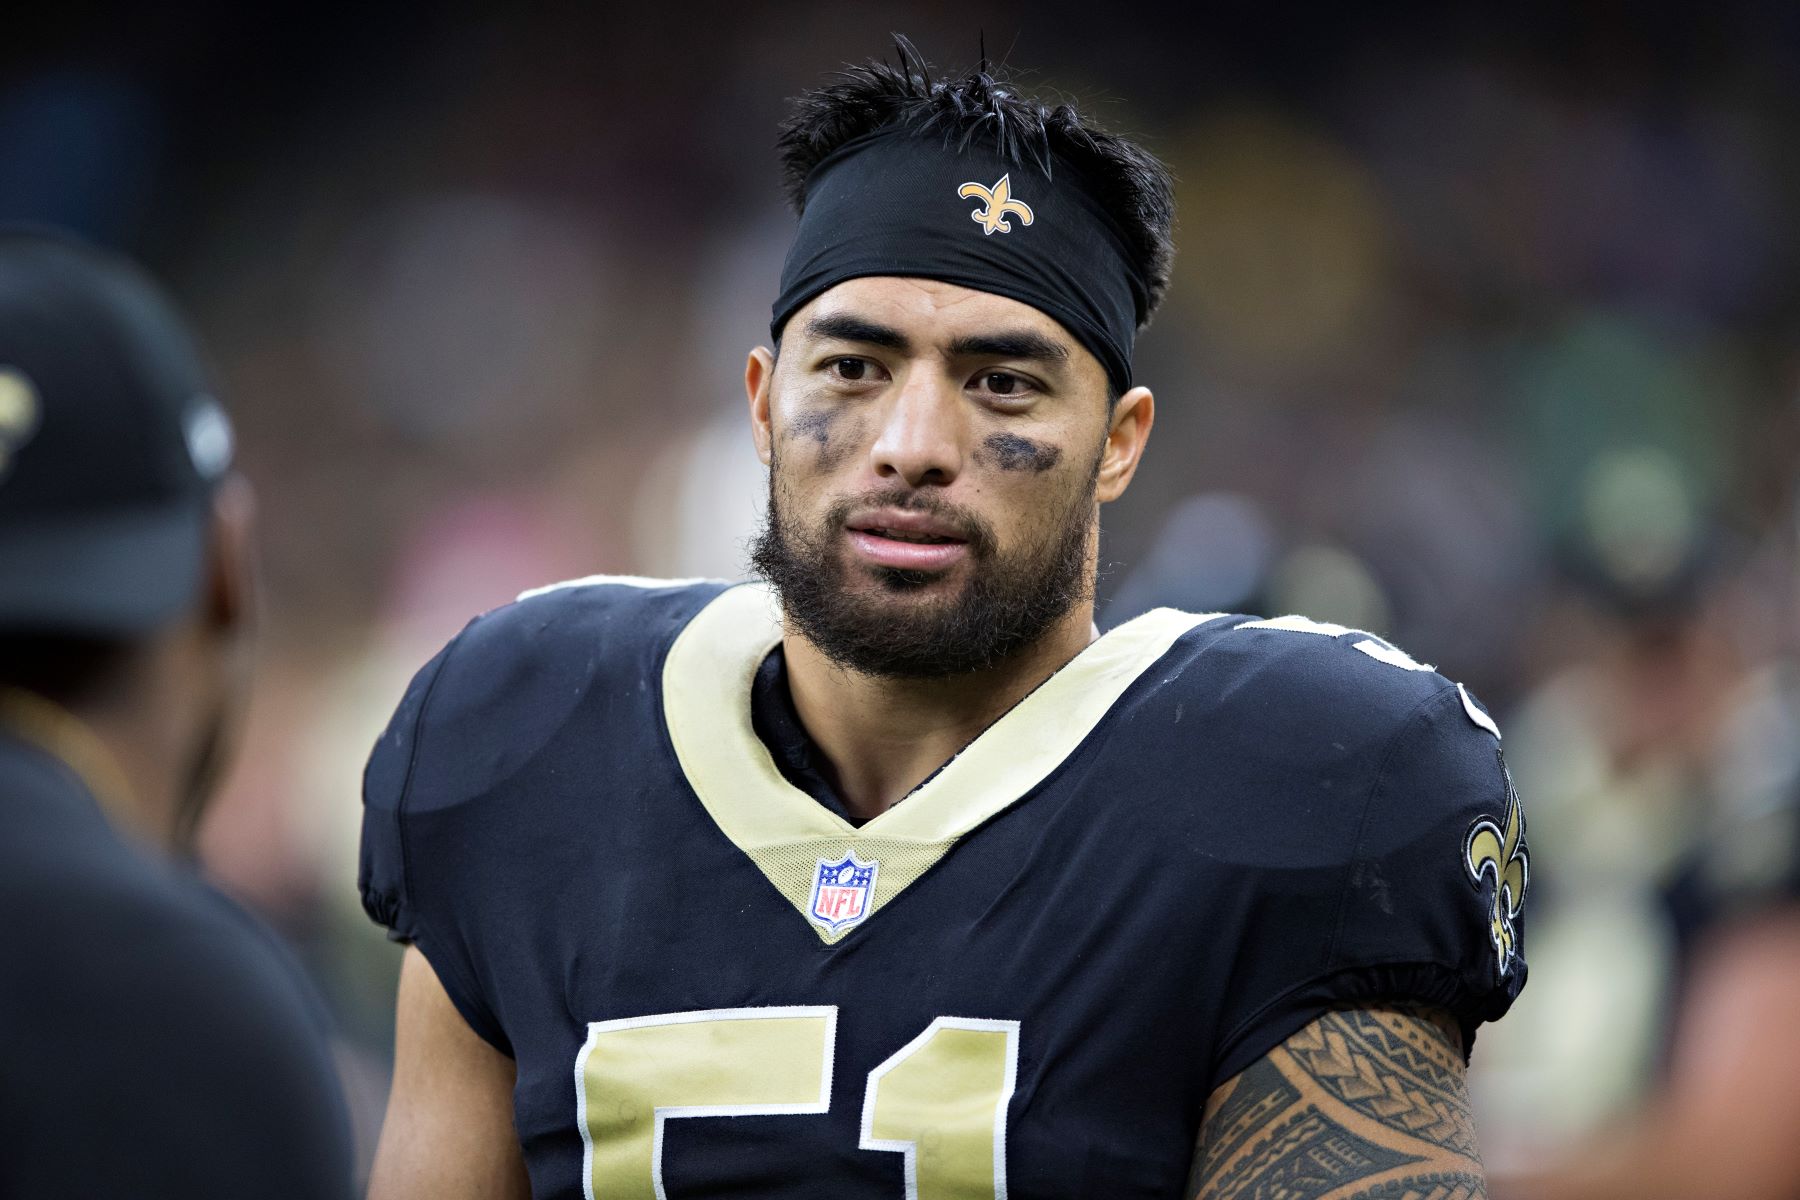 Manti Te'o as #51 on the New Orleans Saints during a preseason game against the Baltimore Ravens